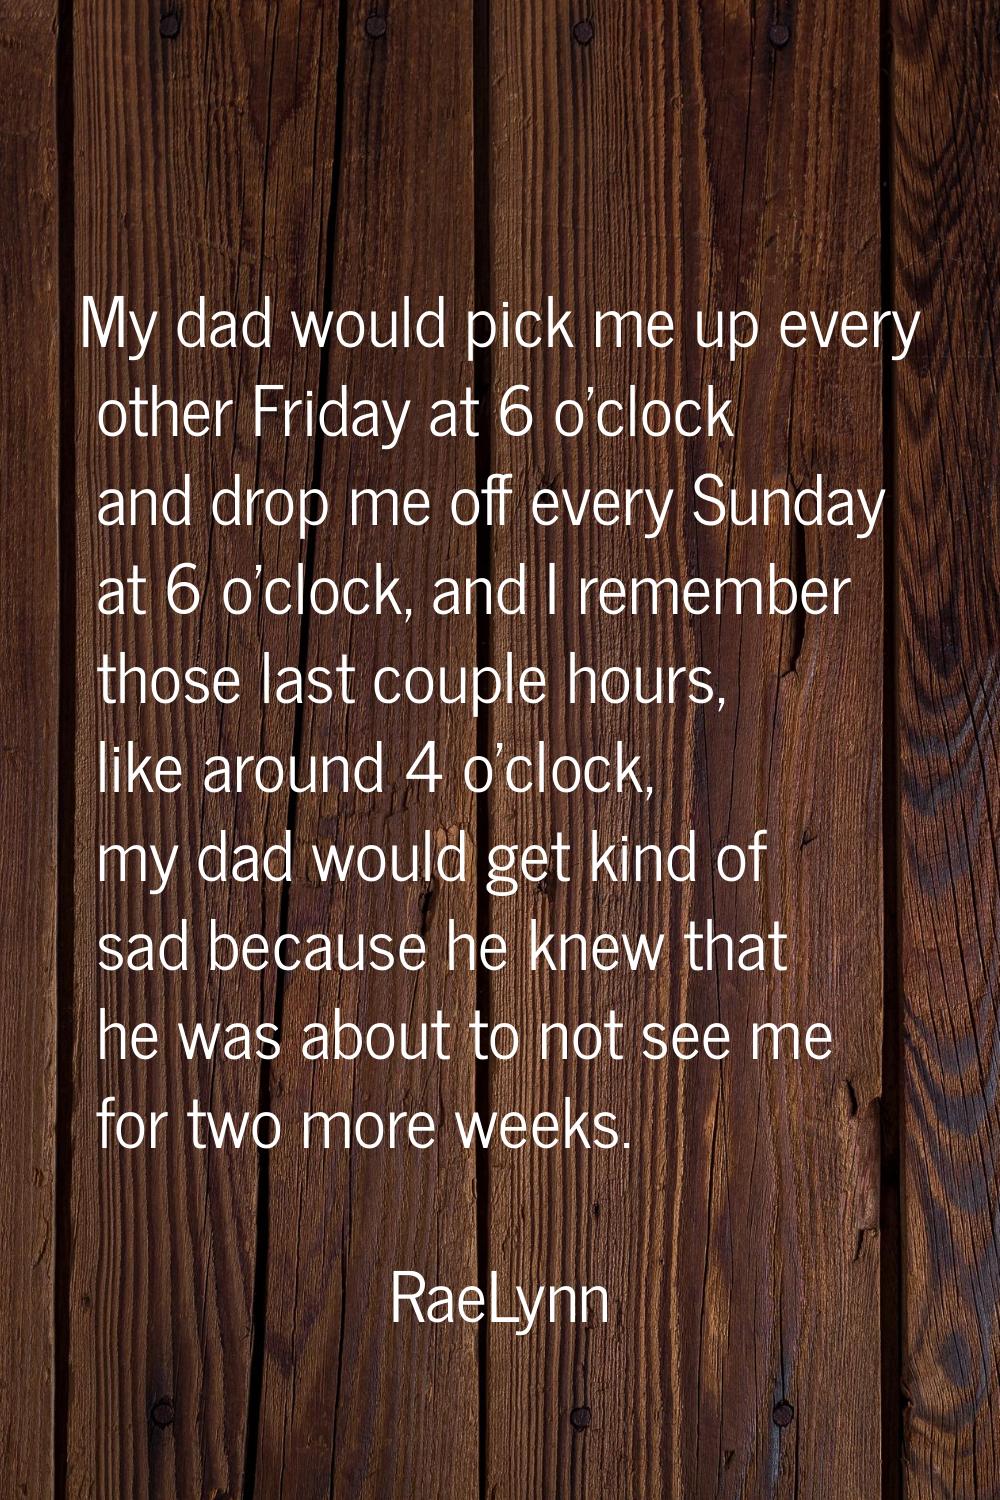 My dad would pick me up every other Friday at 6 o'clock and drop me off every Sunday at 6 o'clock, 